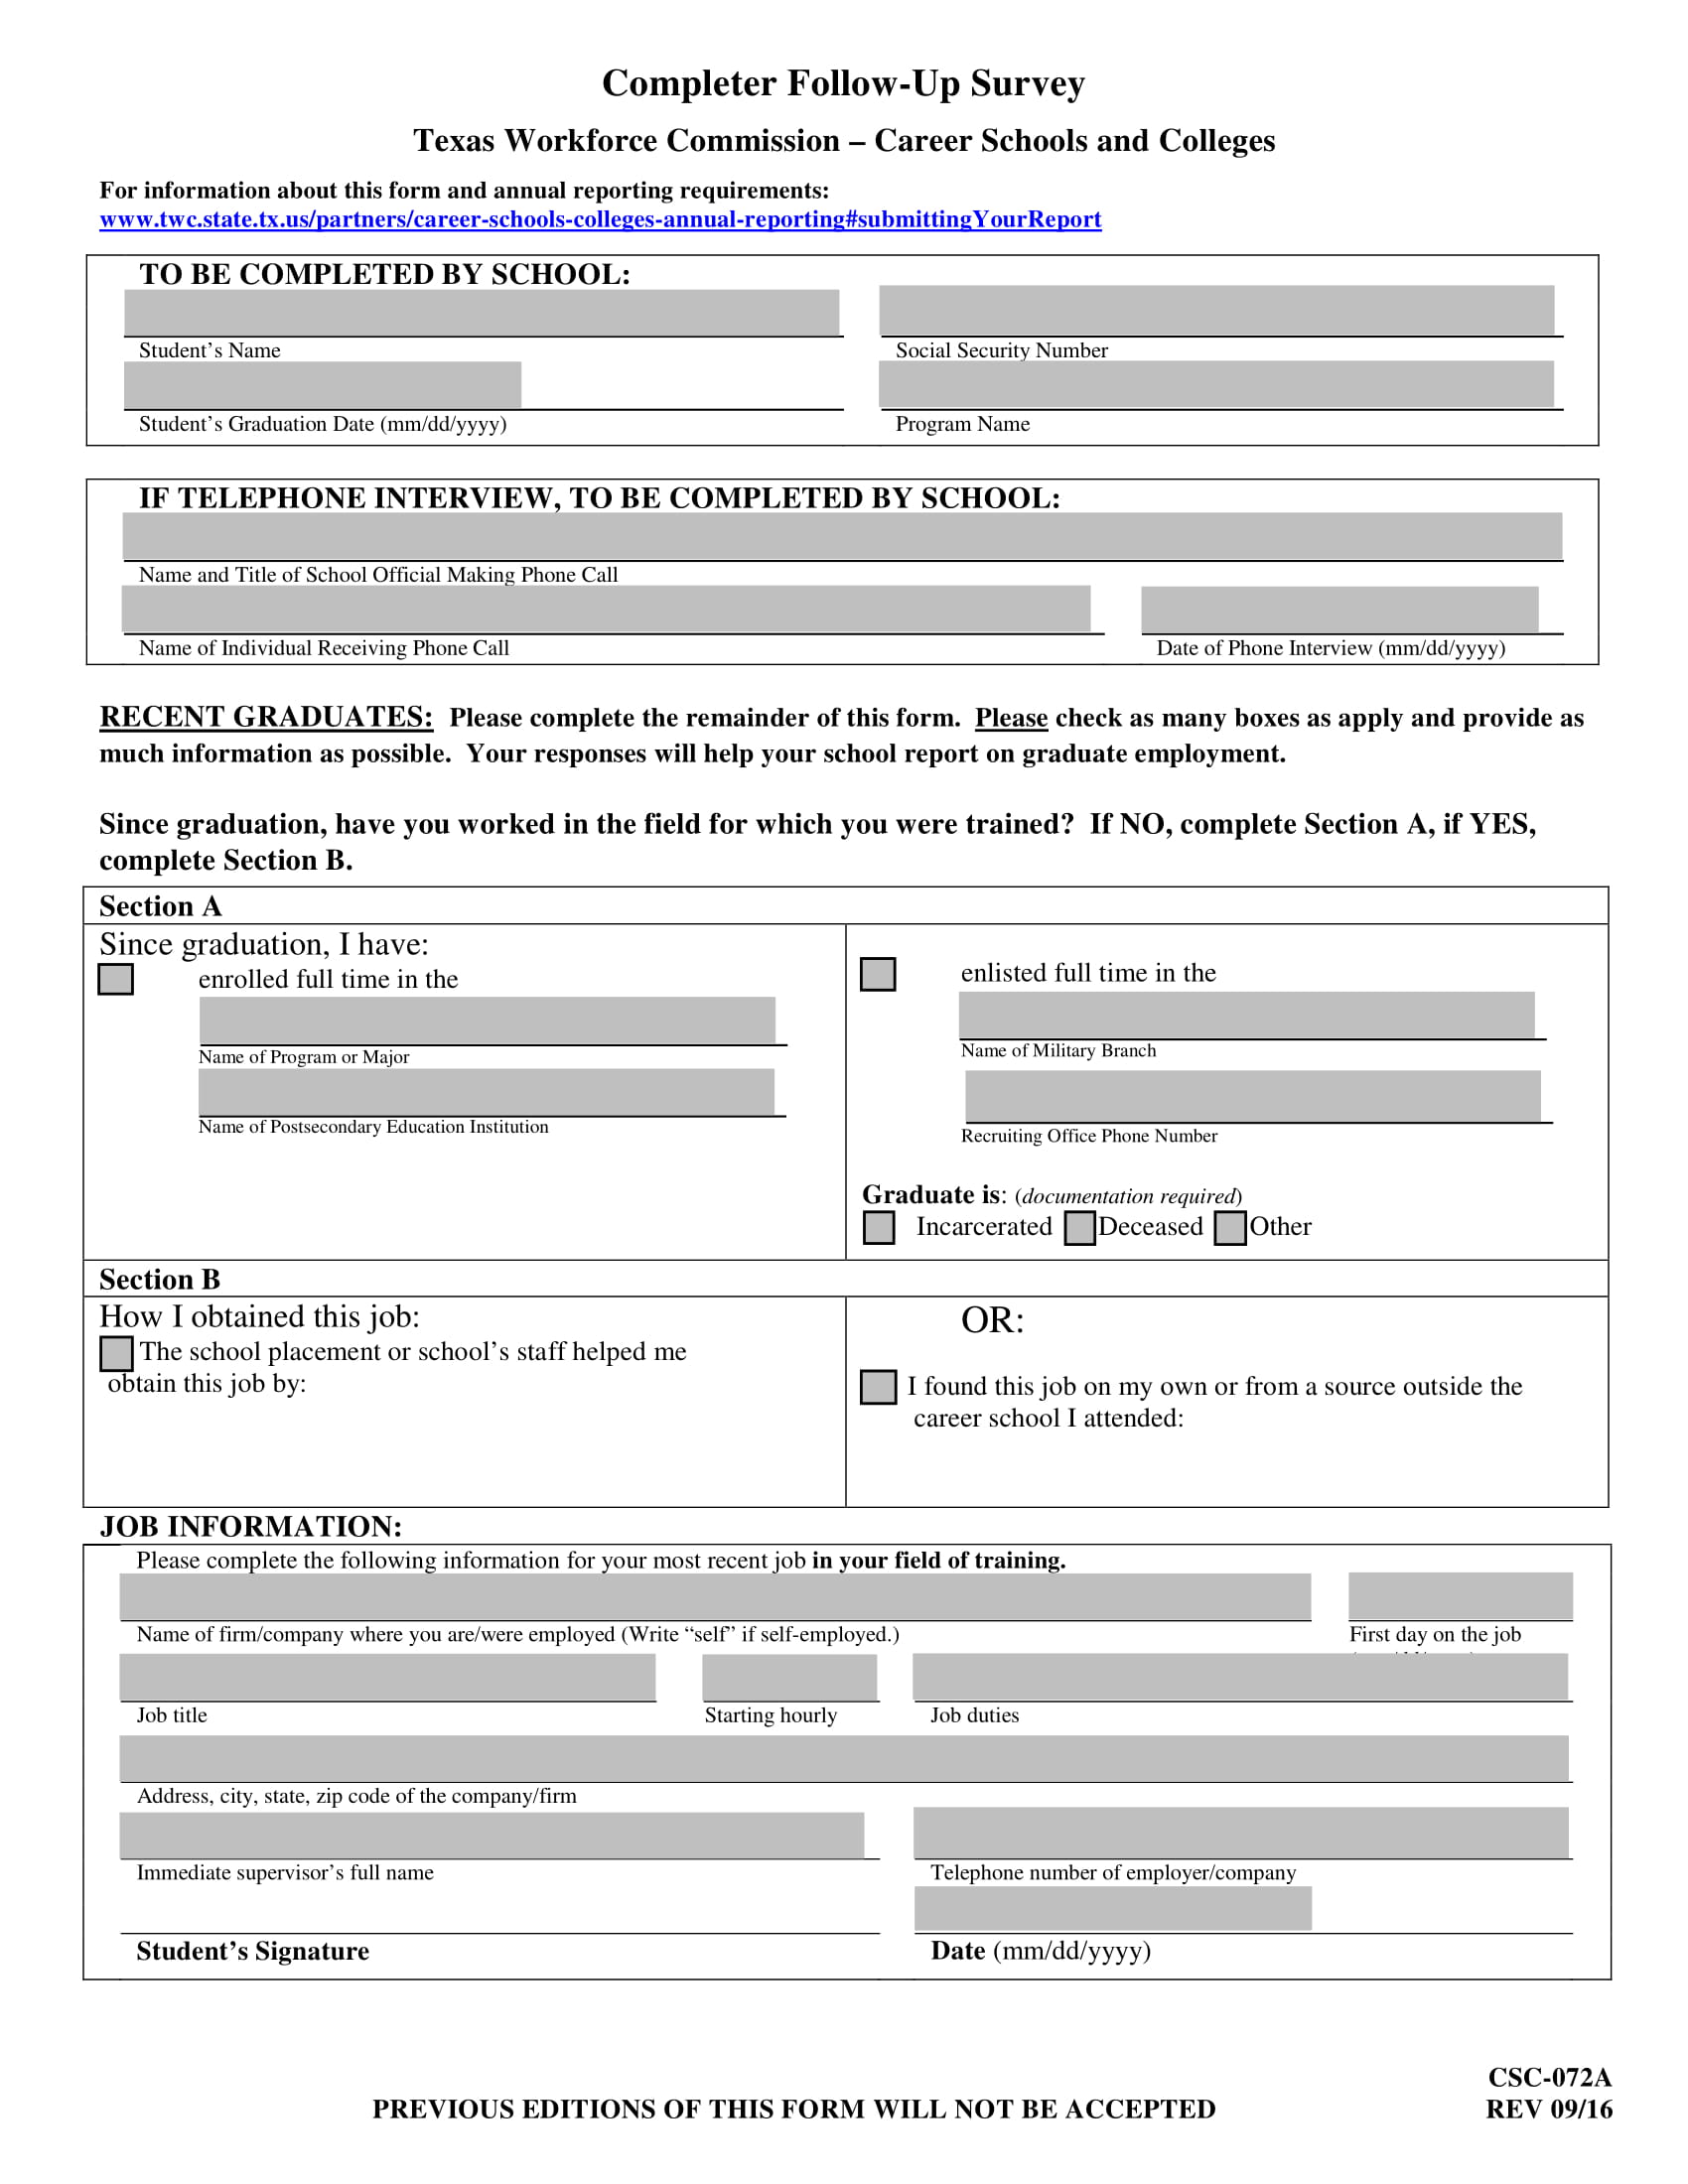 completer follow up survey form 1